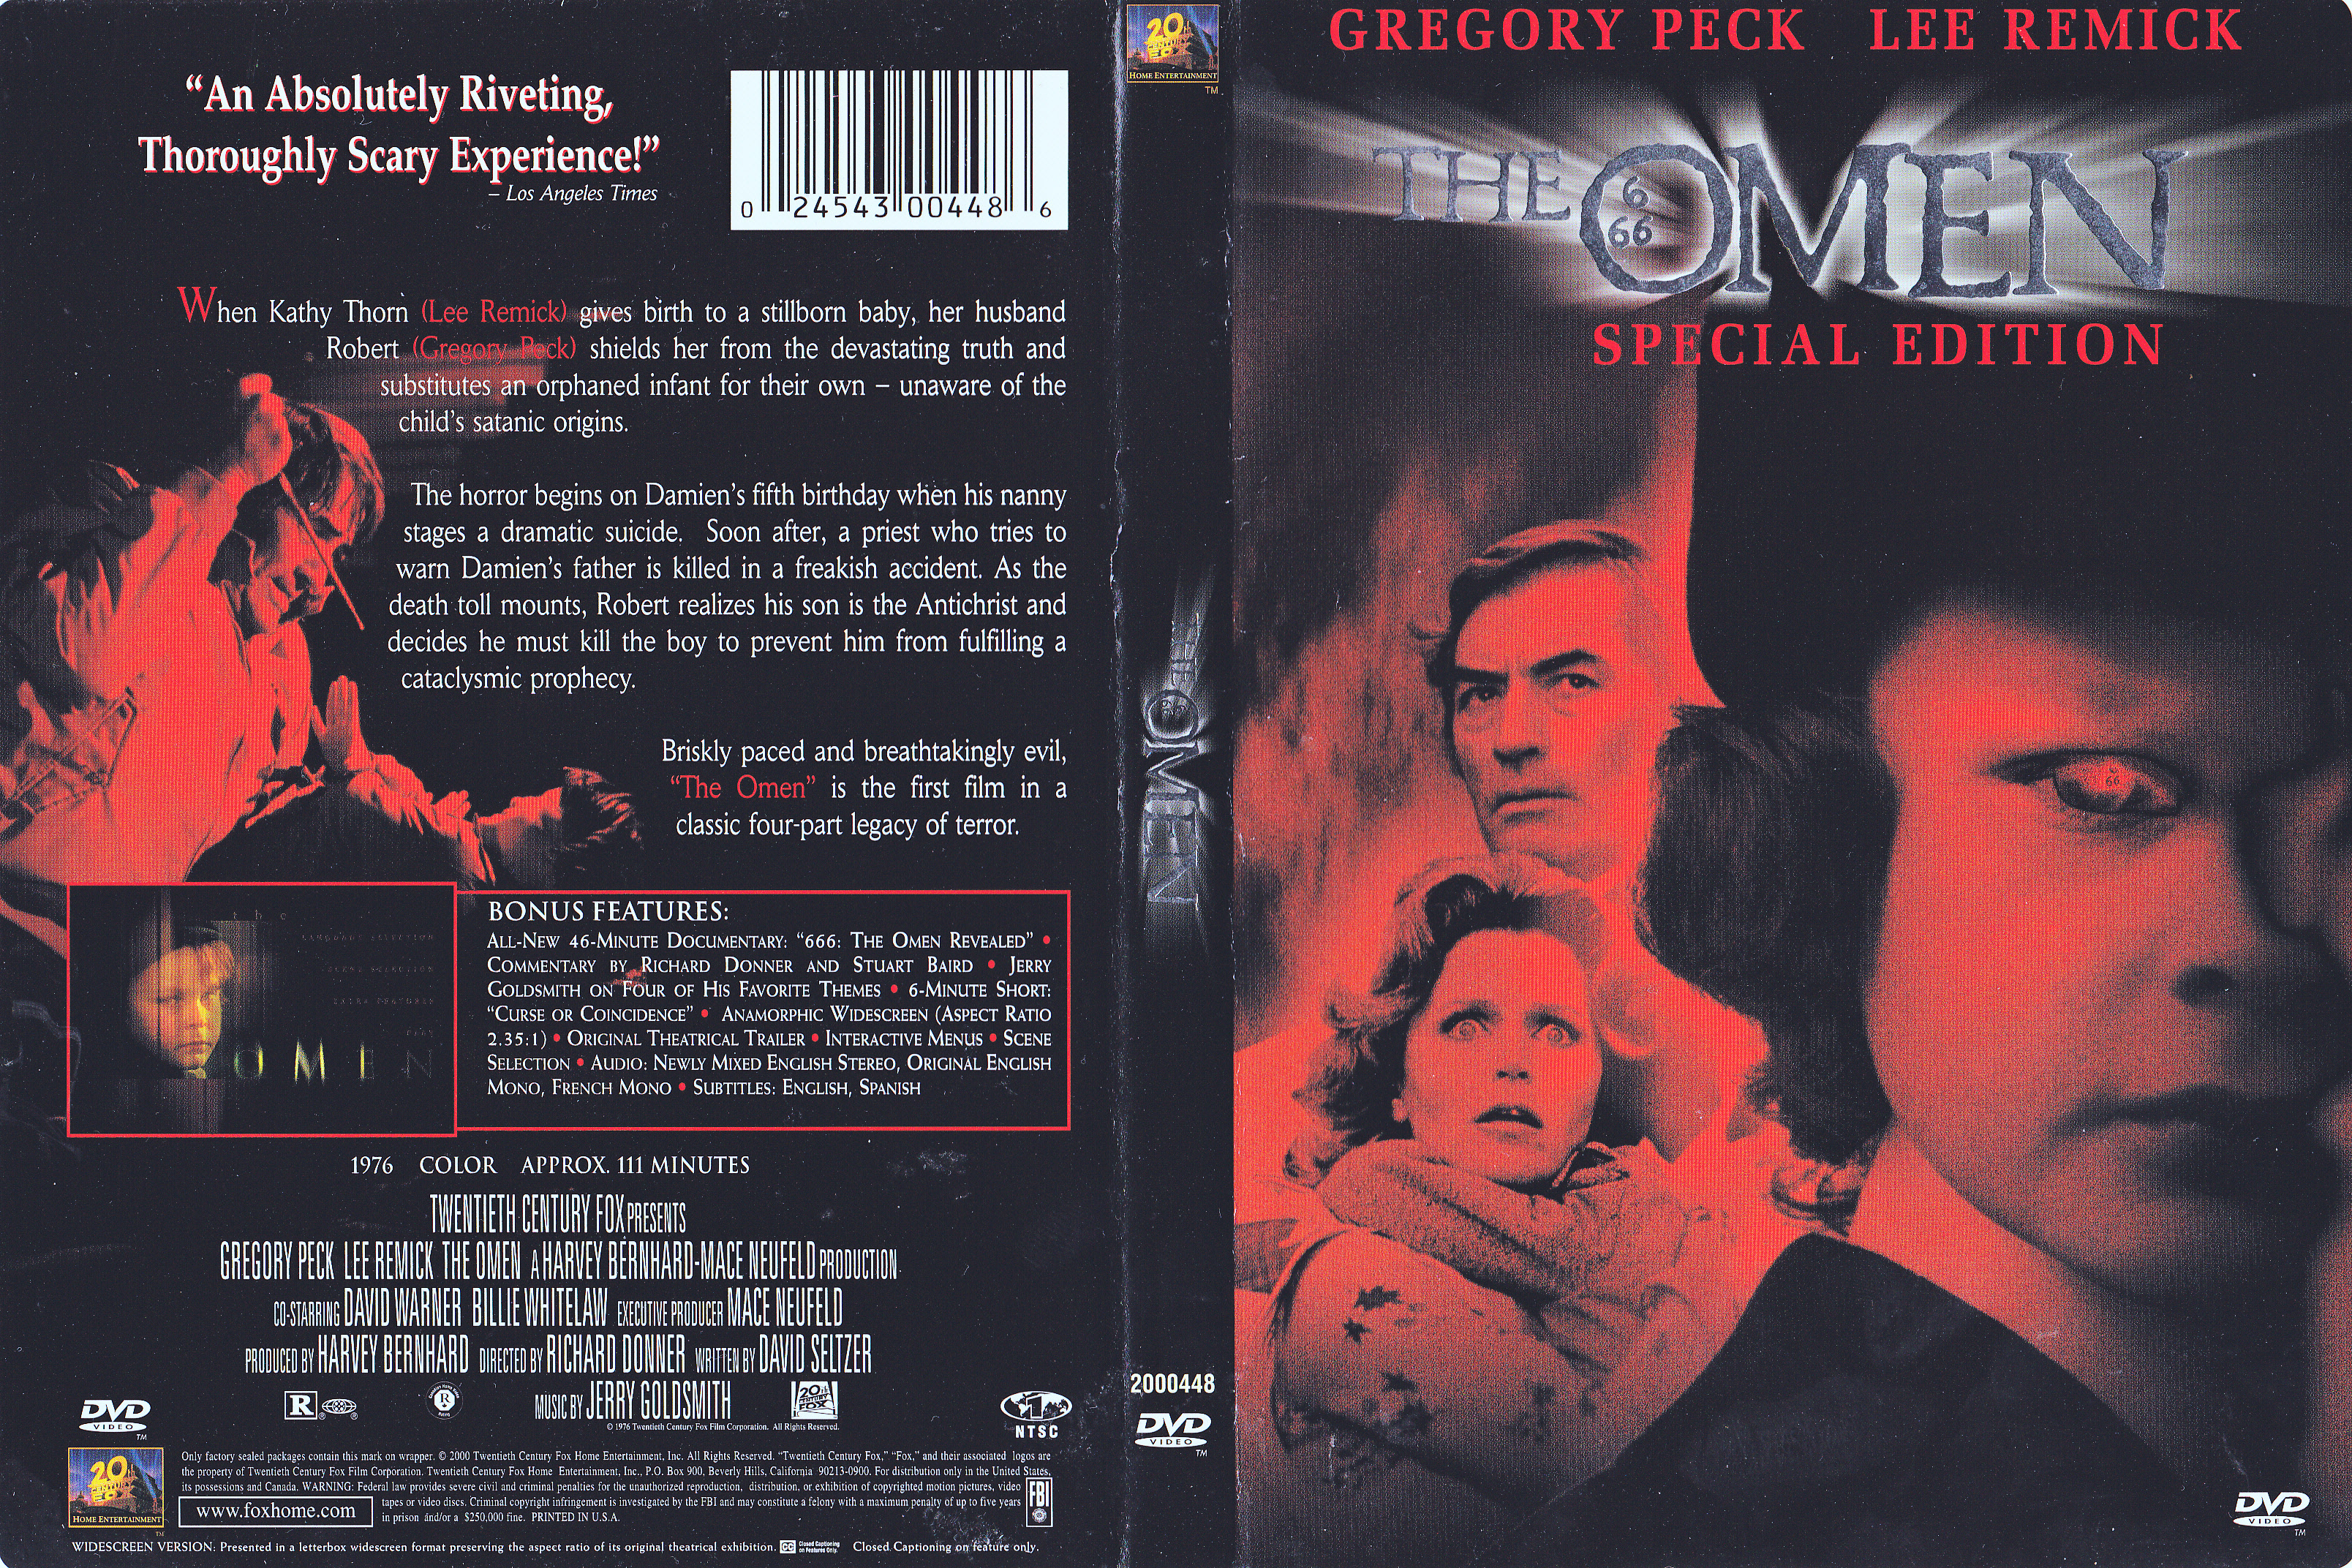 Jaquette DVD The omen (Canadienne)